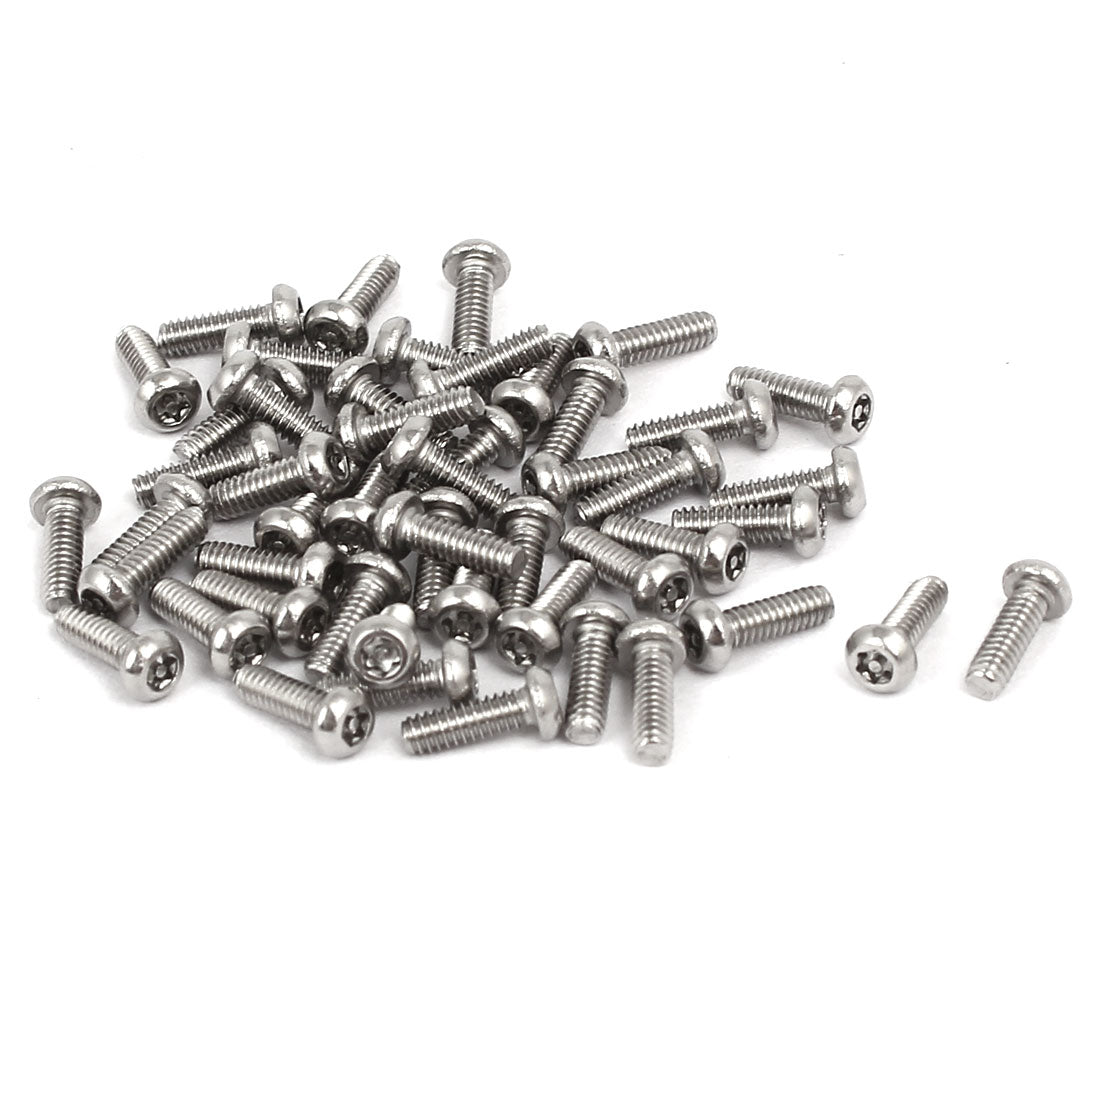 uxcell Uxcell M2x6mm 304 Stainless Steel Button Head Torx Security Machine Screws 50pcs